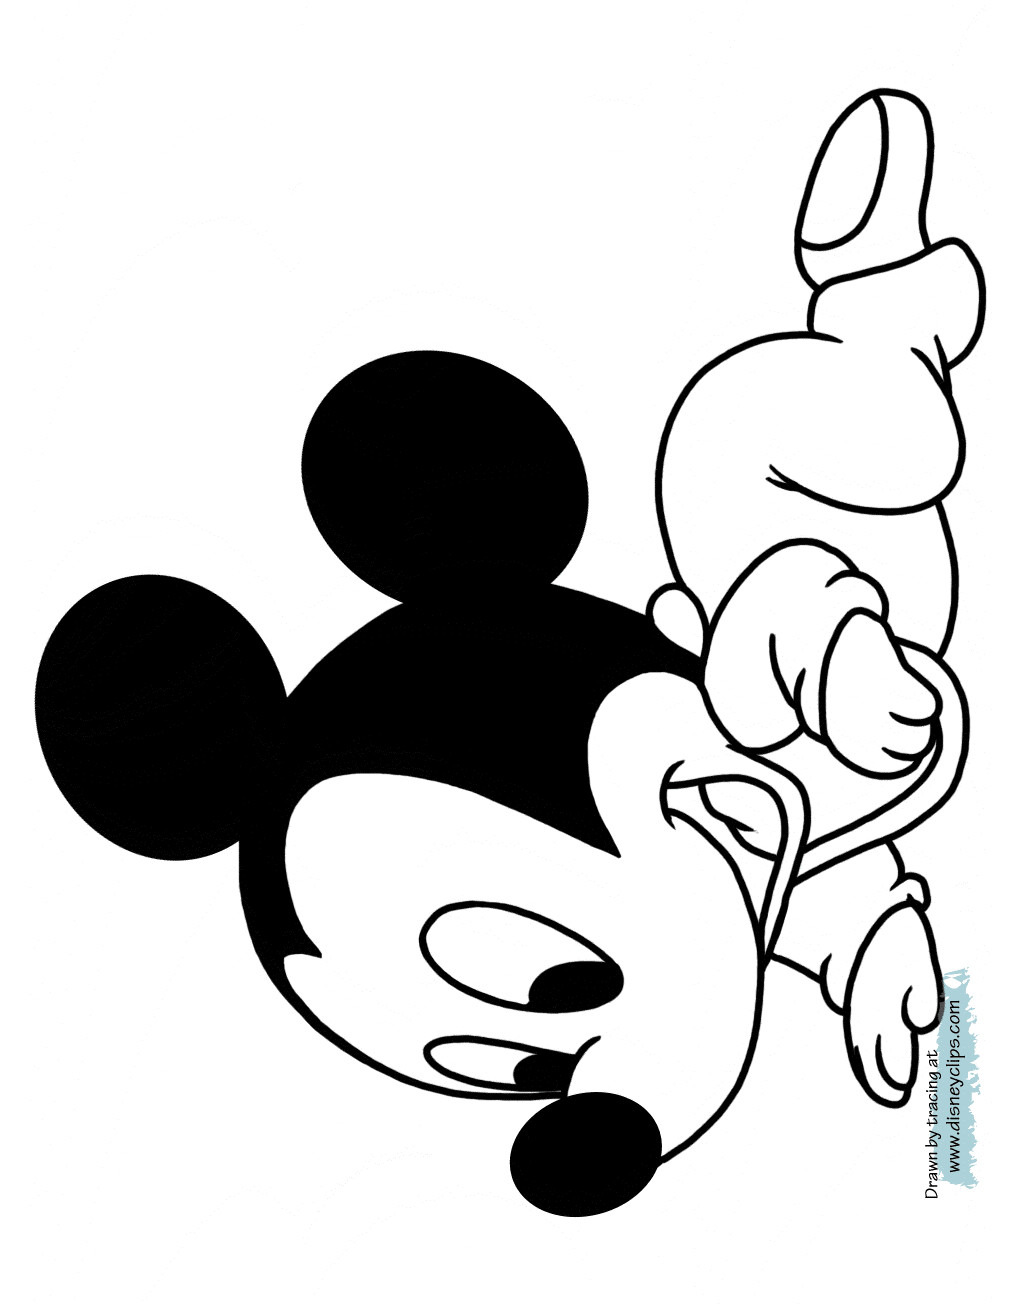 Baby Mickey Coloring Pages
 Disney Babies Coloring Pages